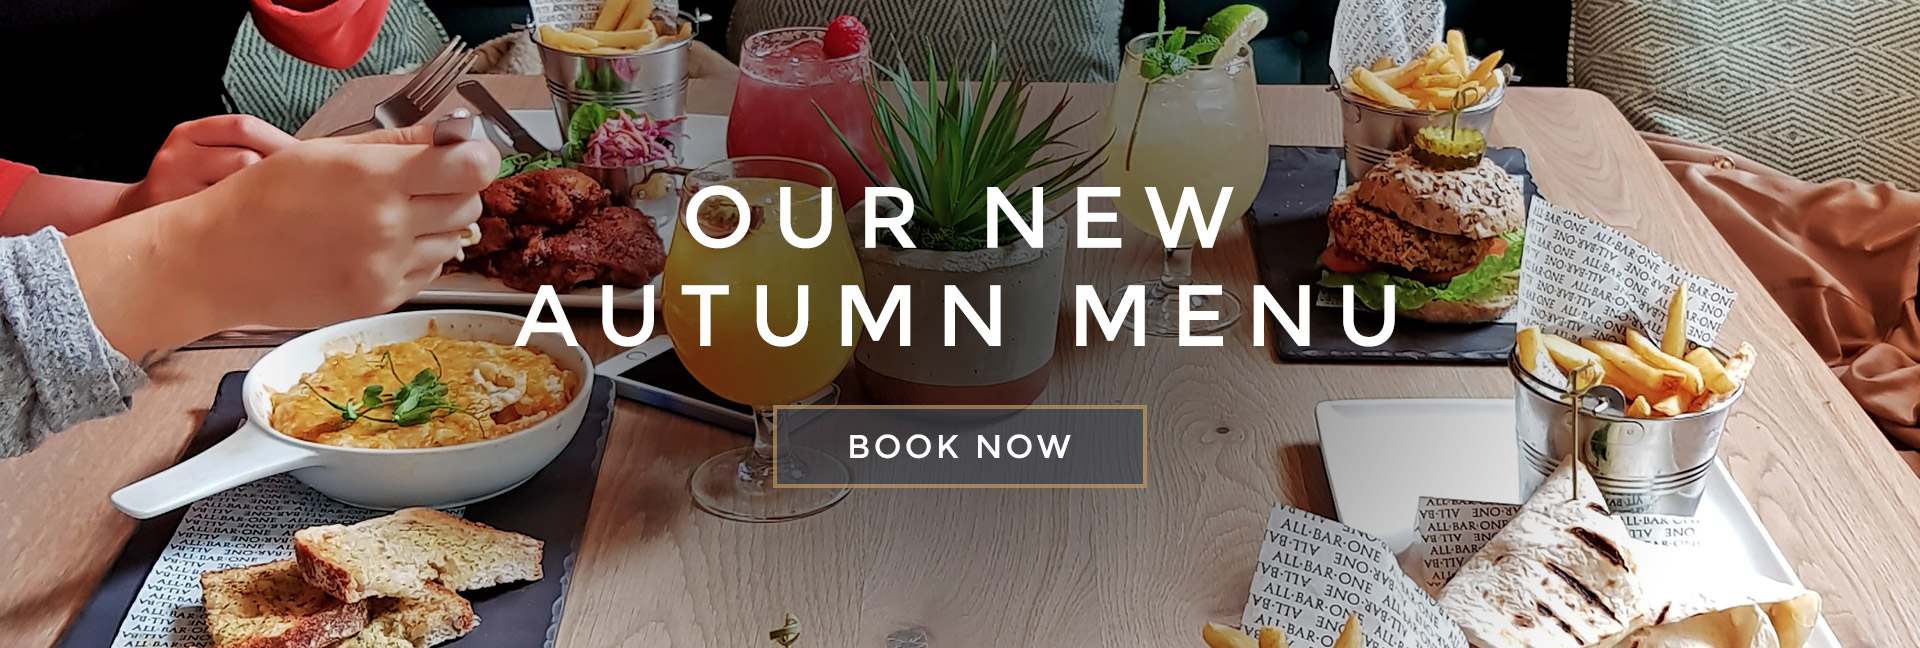 Our new Autumn menu at All Bar One Waterloo - Book now